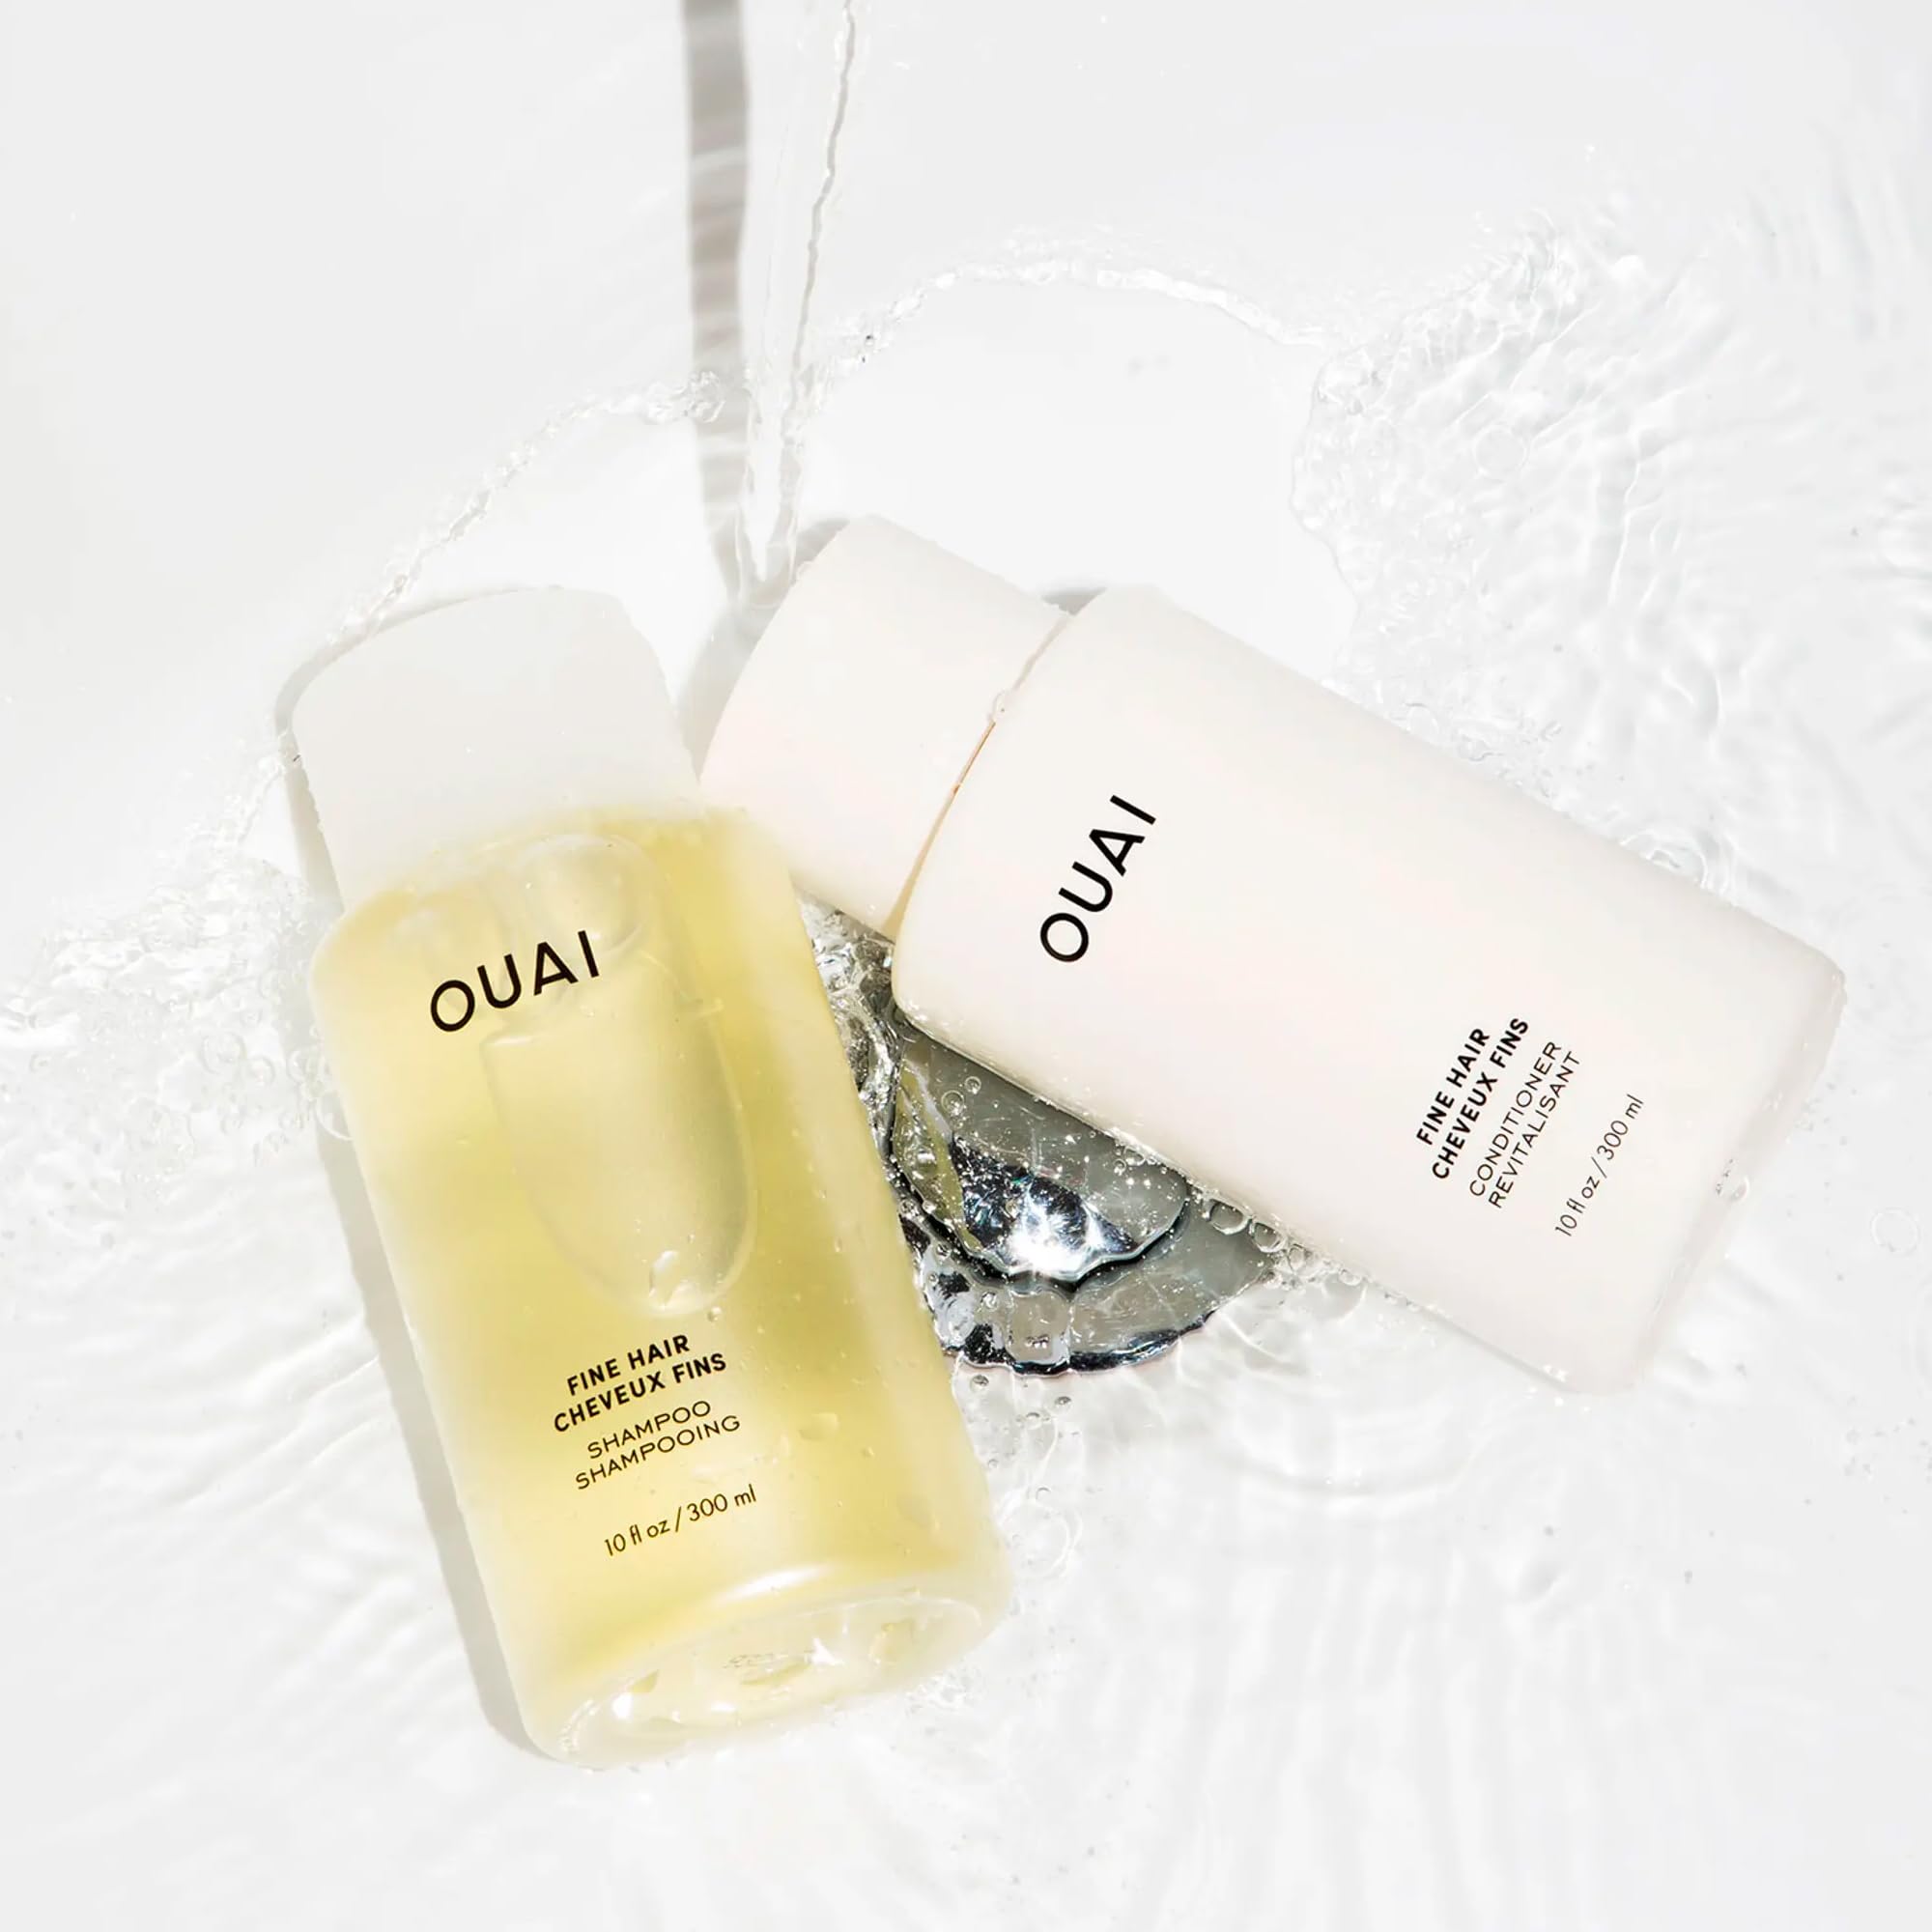 OUAI Fine Conditioner - Lightweight Conditioner for Softness, Bounce & Volume - Made with Keratin and Biotin - Free of Parabens, Sulfates & Phthalates - 10 fl oz